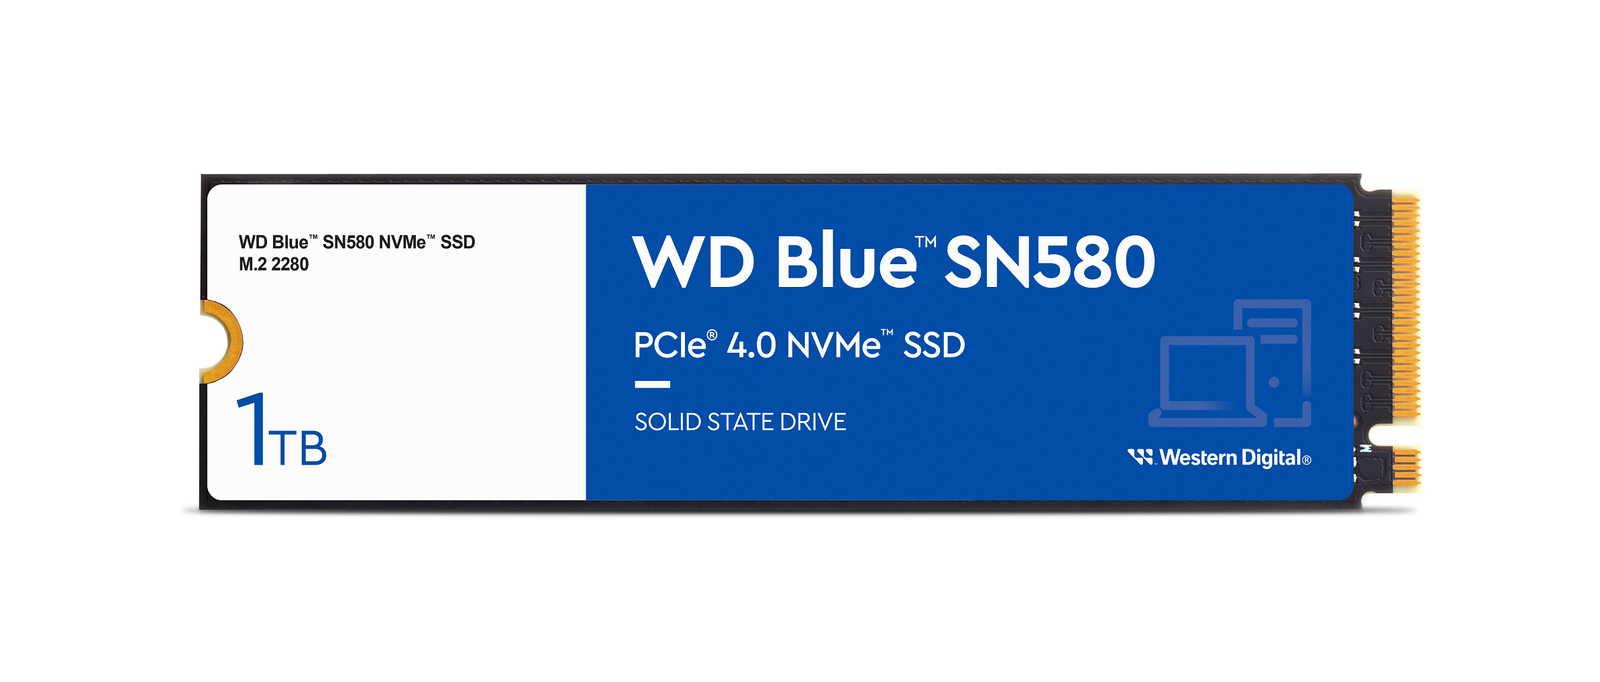 Western Digital introduces high performance WD Blue SN580 NVMe SSD for creative professionals in India